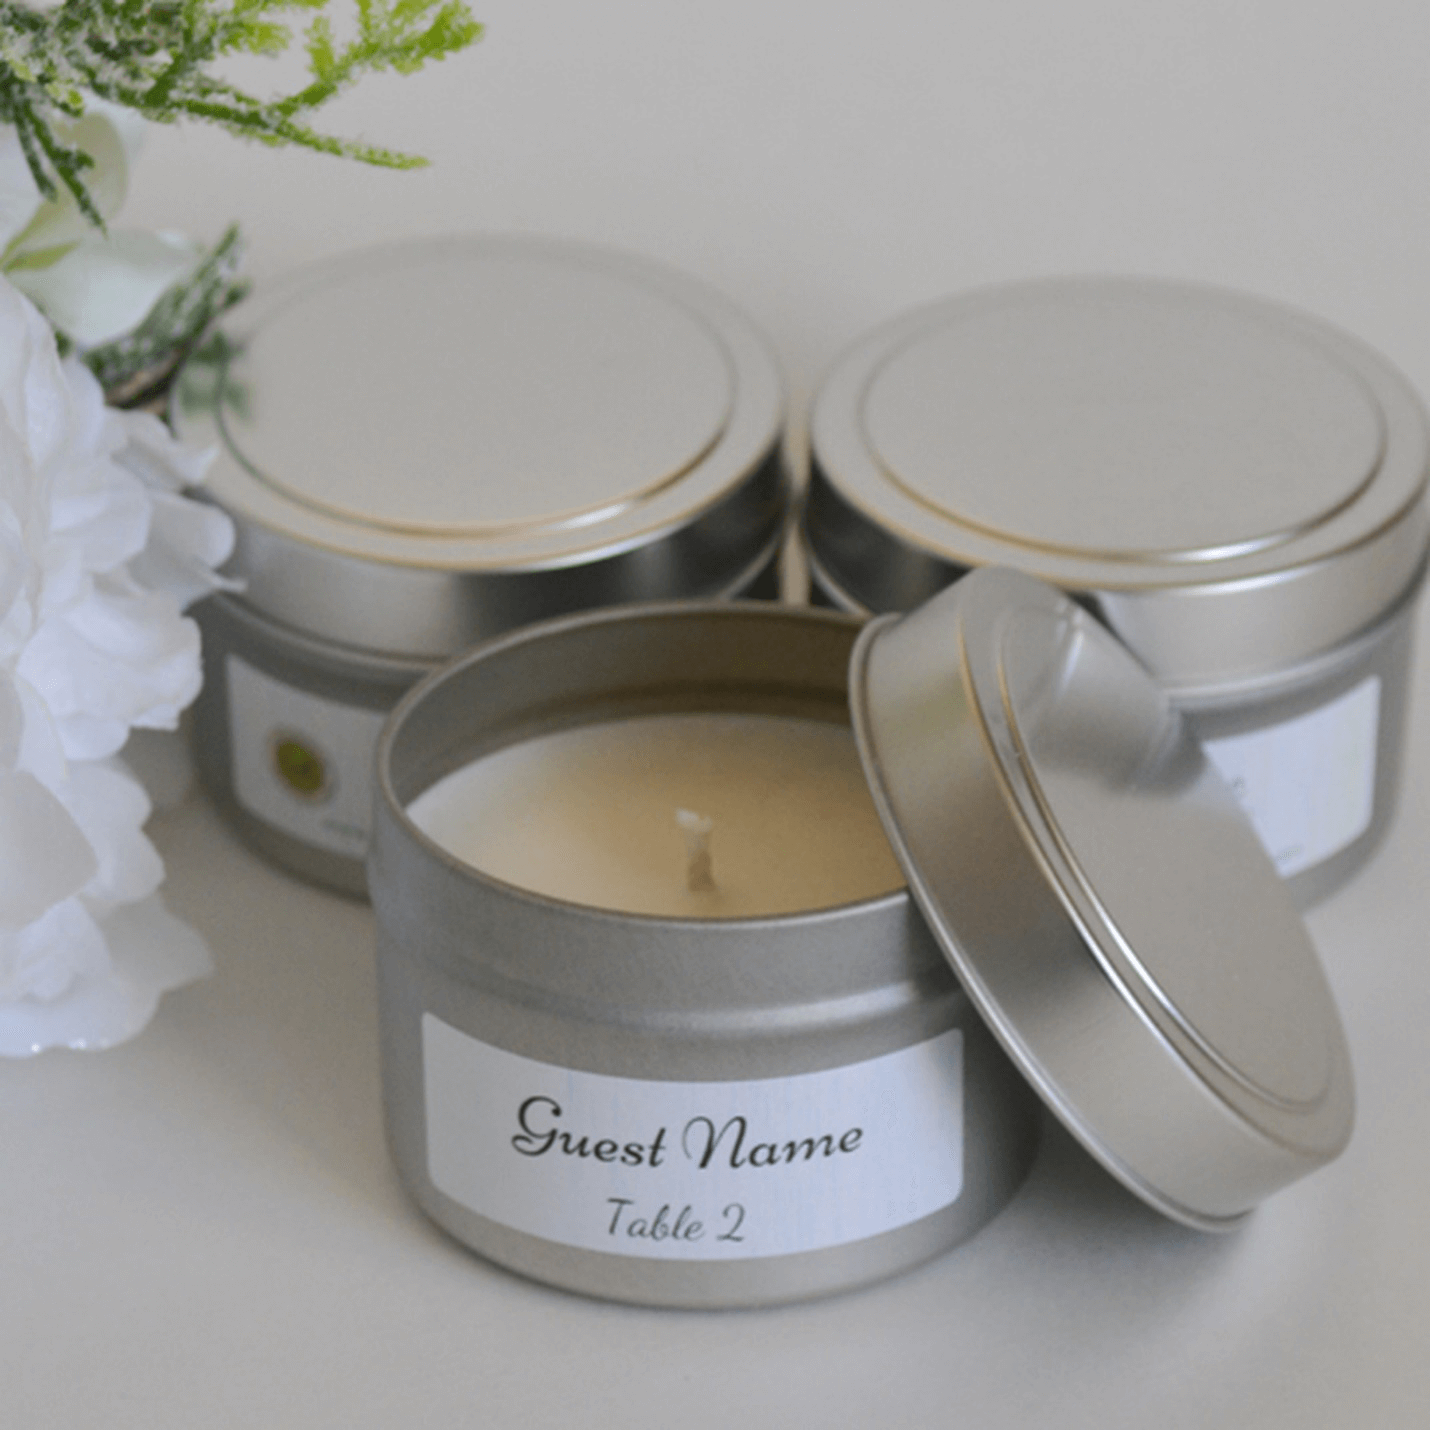 Wholesale Candle Tins Suppliers: The Buying Guide | 2020